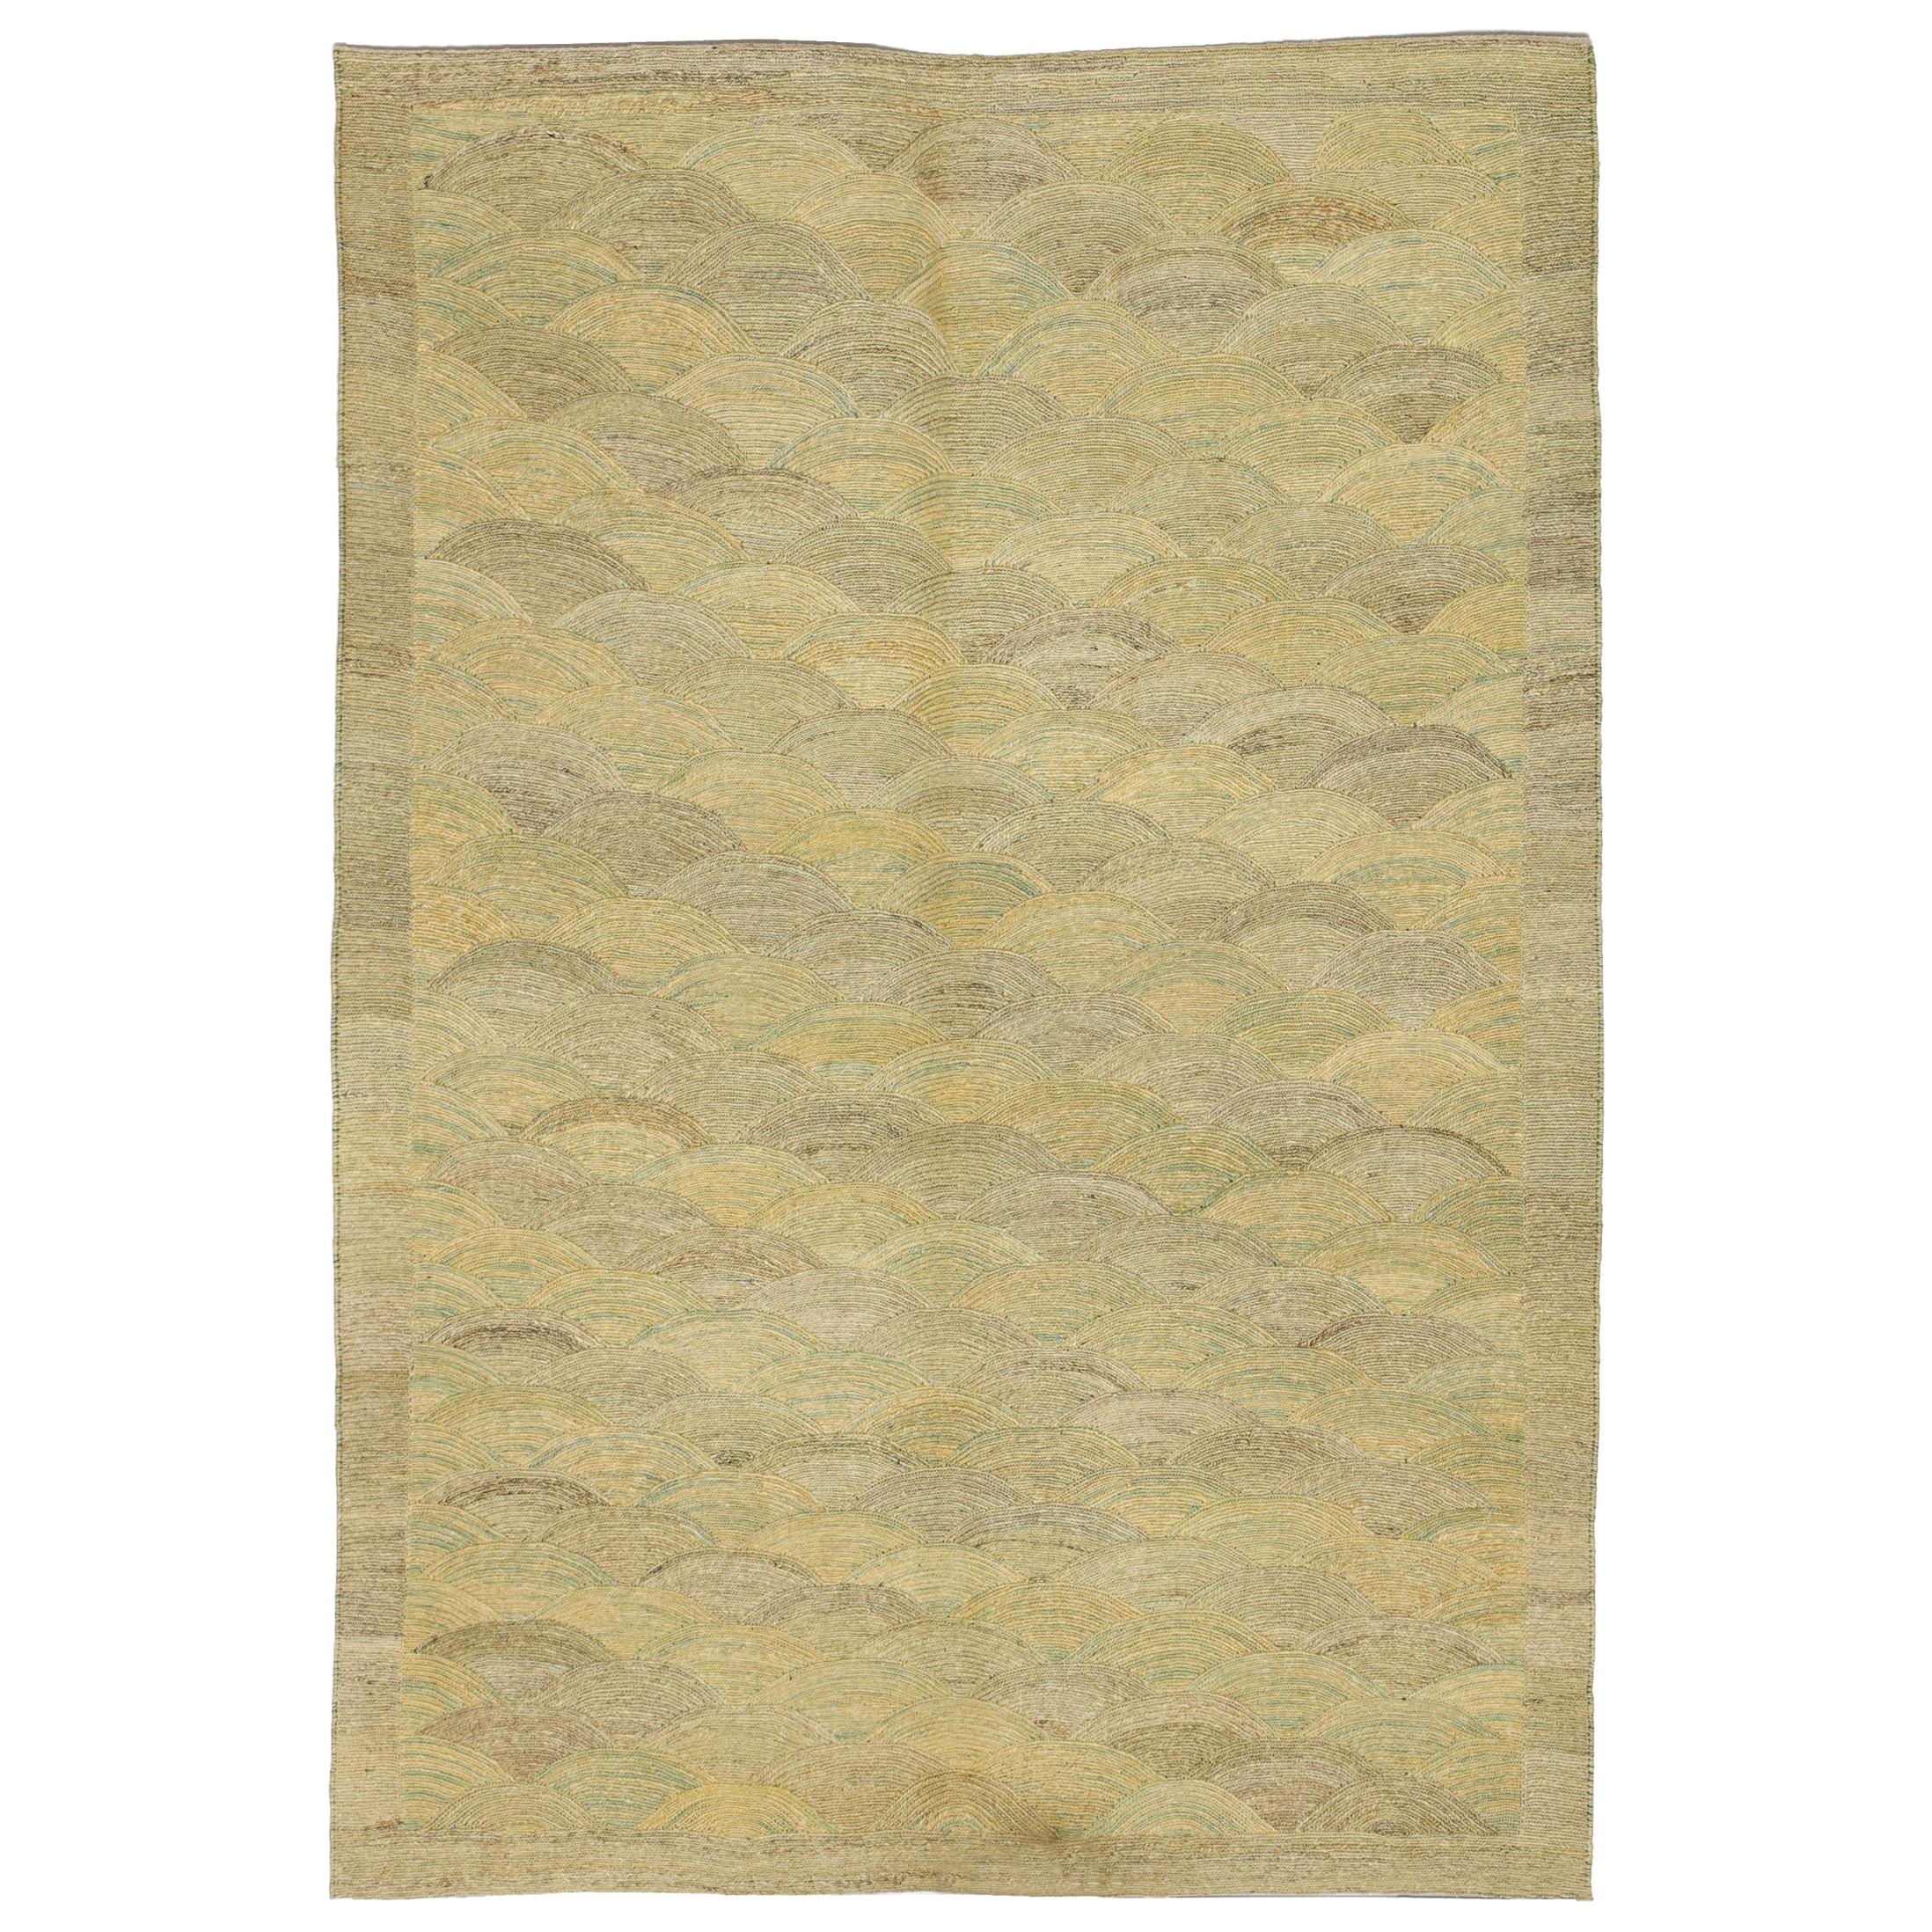 Orley Shabahang Signature Collection "Rice Paddy" Handmade, Contemporary Carpet